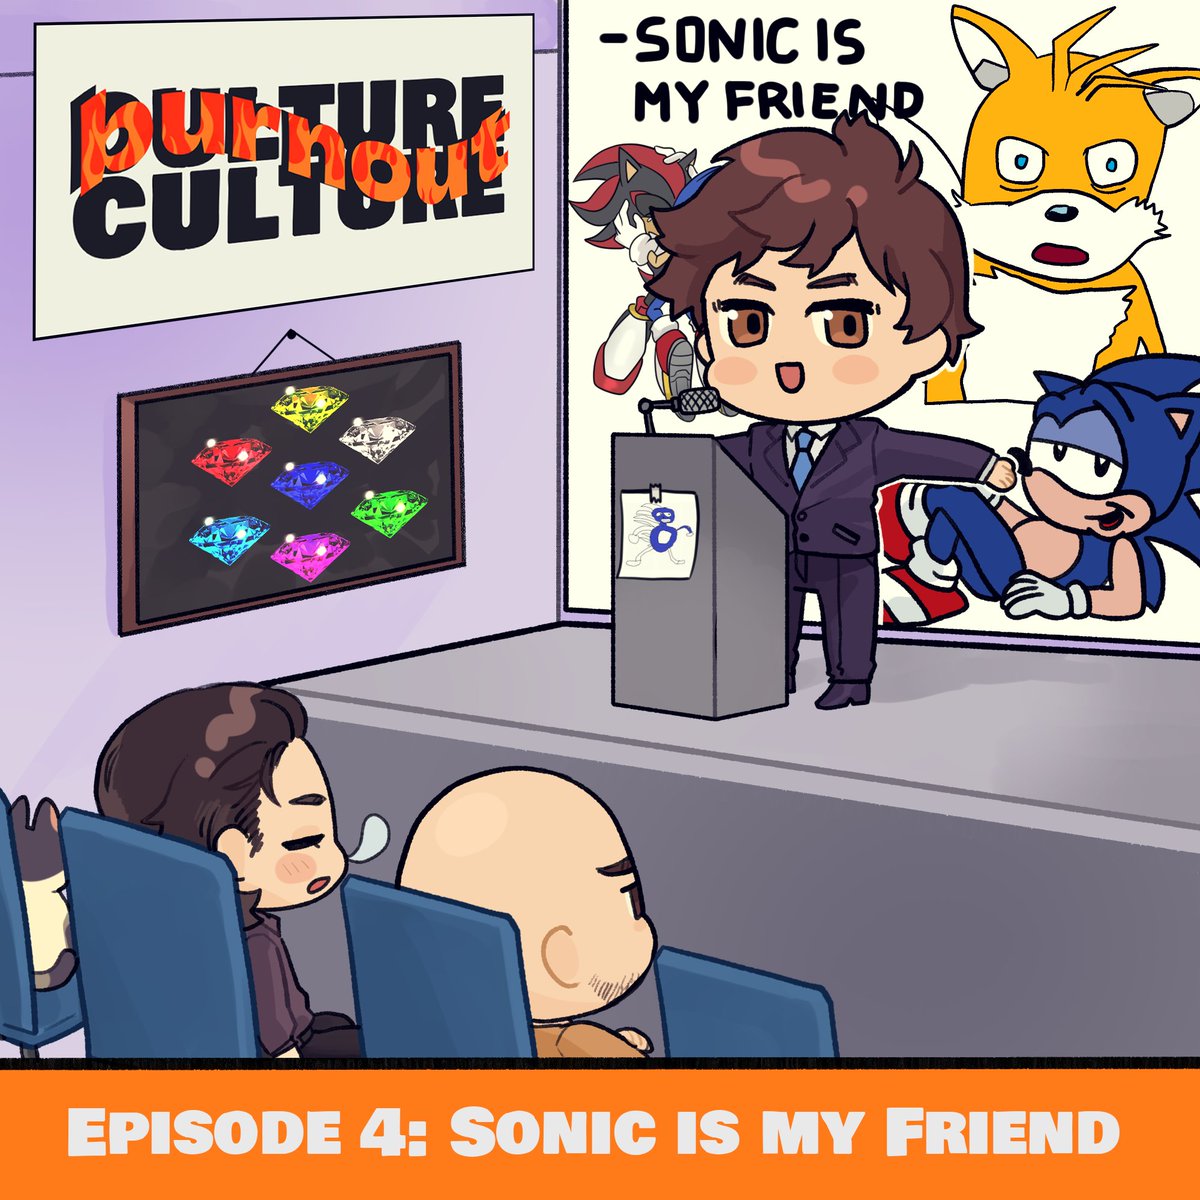 BURNOUT CULTURE EPISODE 4 IS OUT NOW❗️LISTEN❗️❗️ We're back for our fourth first episode! Kaz loves diablo! GC plays a sound novel! And Cullen... has a new hyperfixation. Link below 🔗